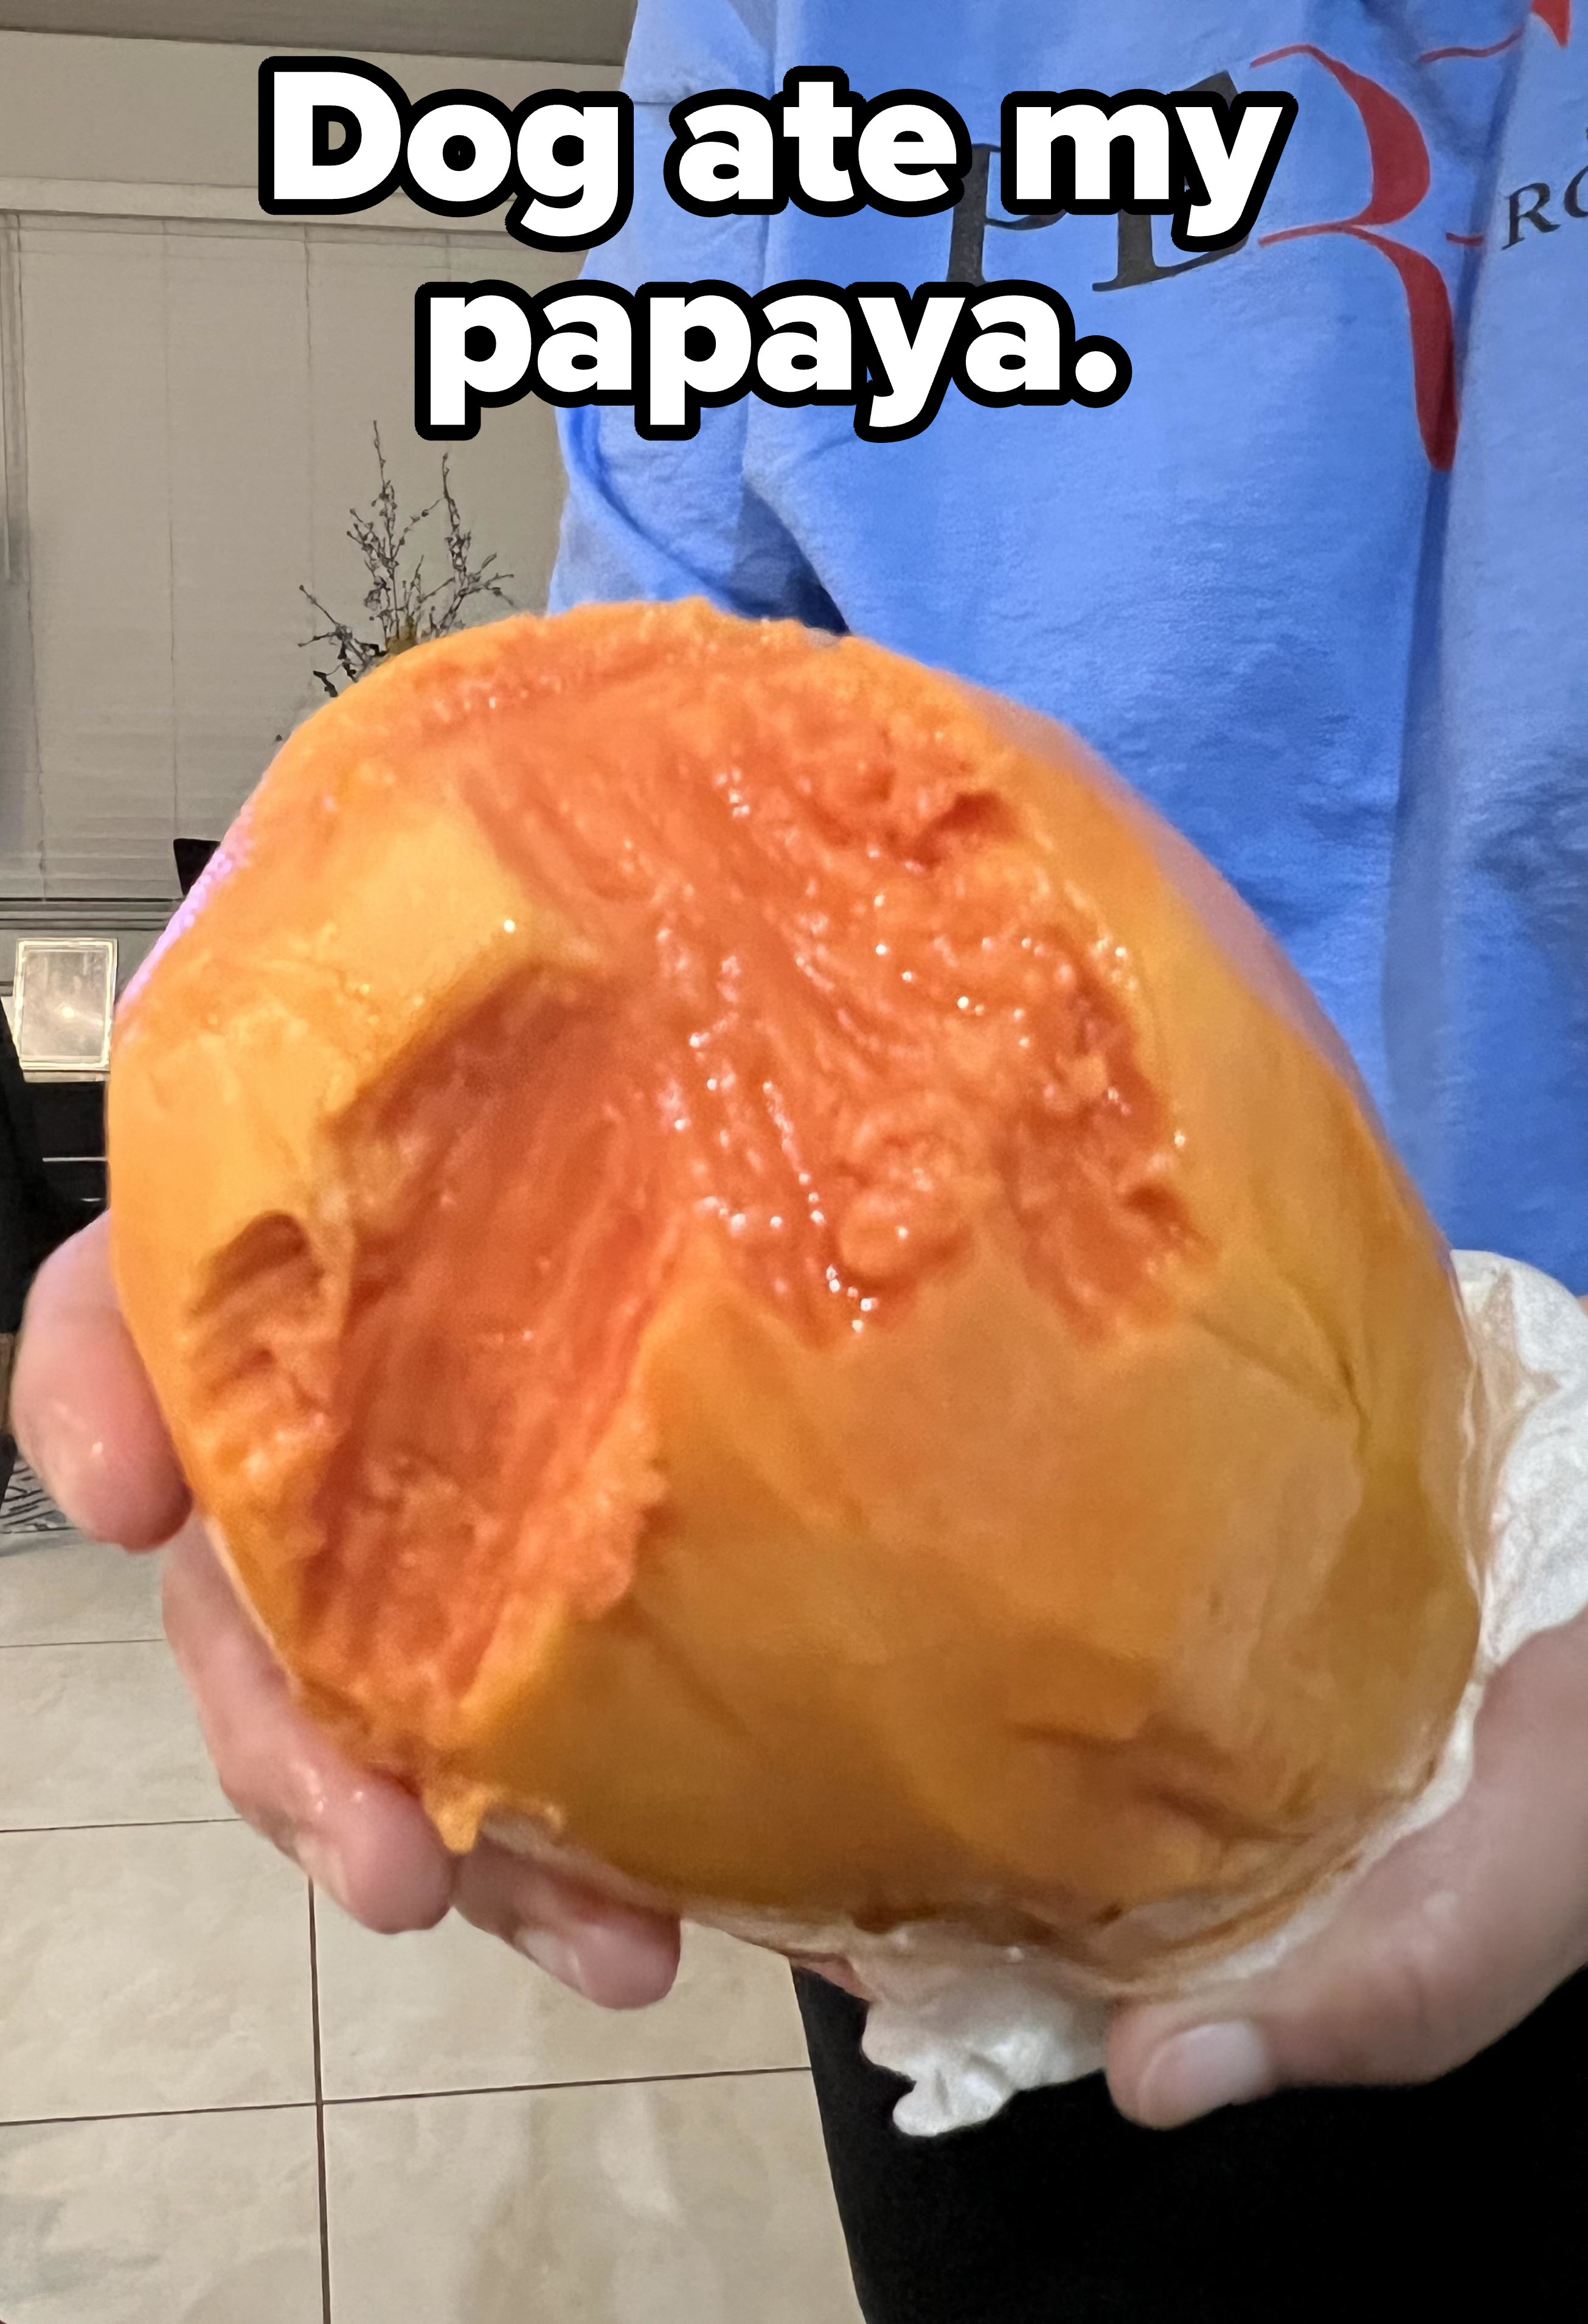 Person holding a partially eaten whole but peeled papaya, indoors